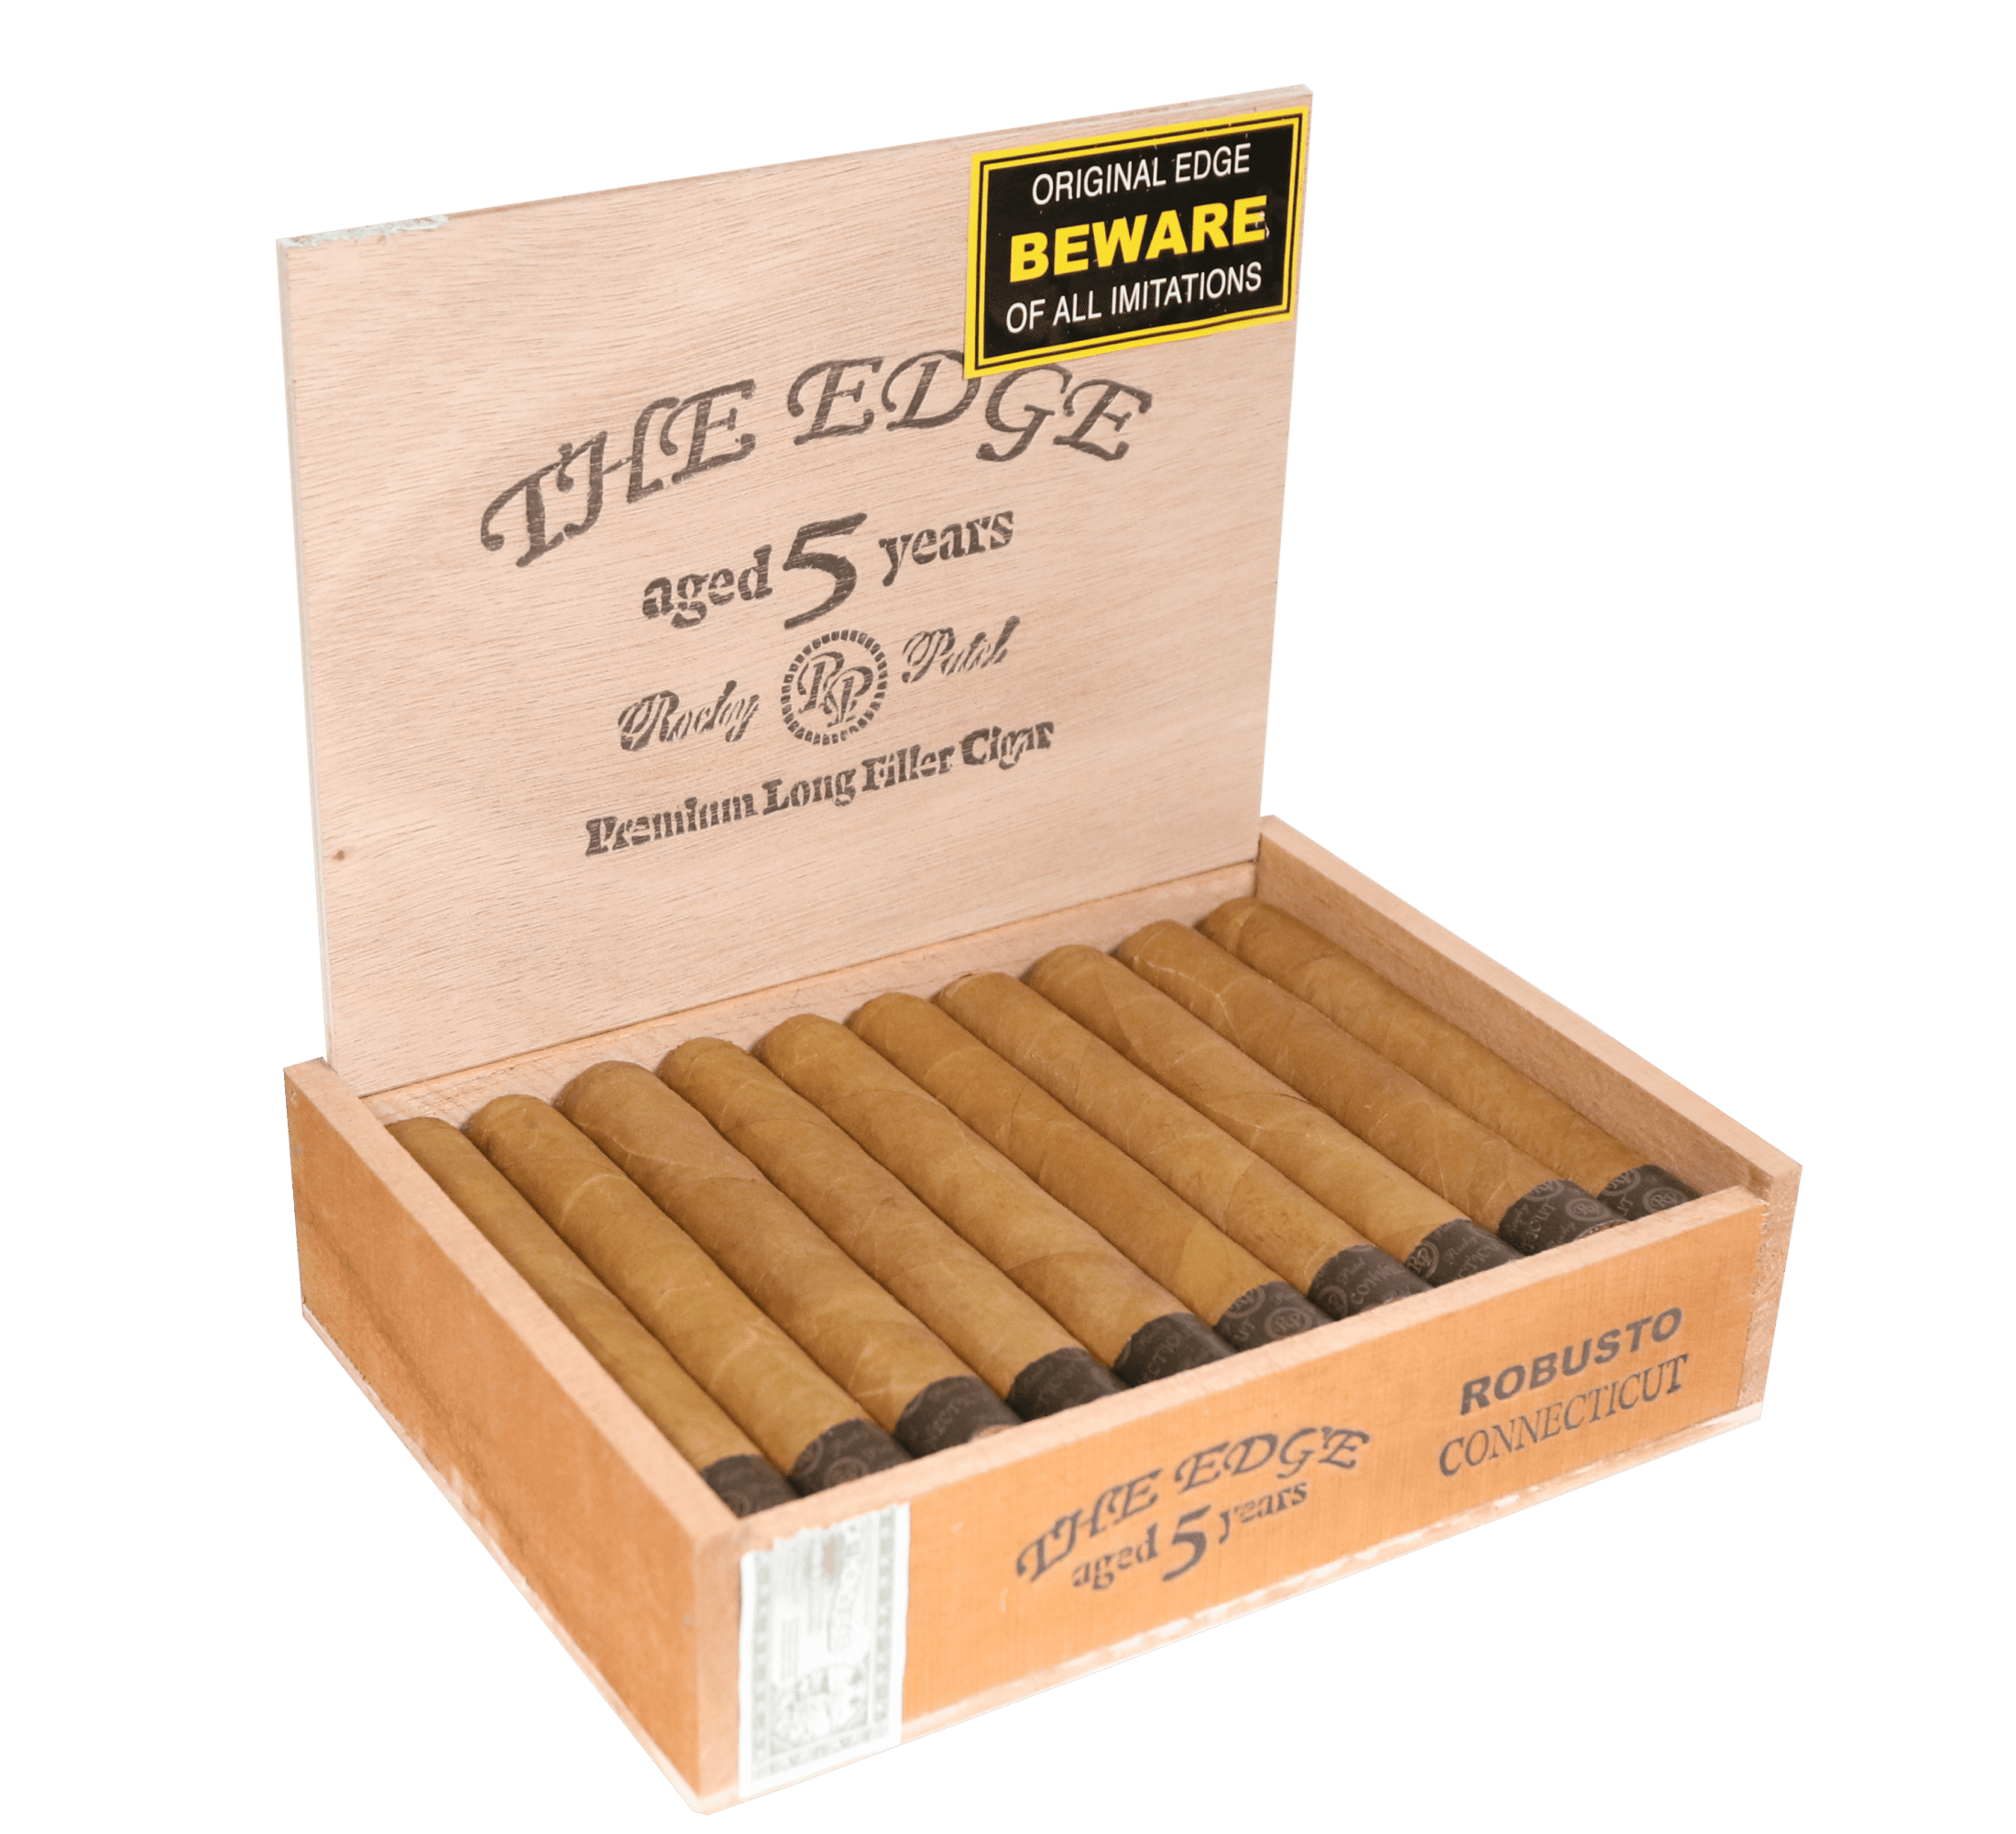 Open box 20 count of Rocky Patel The Edge Connecticut Robusto cigars